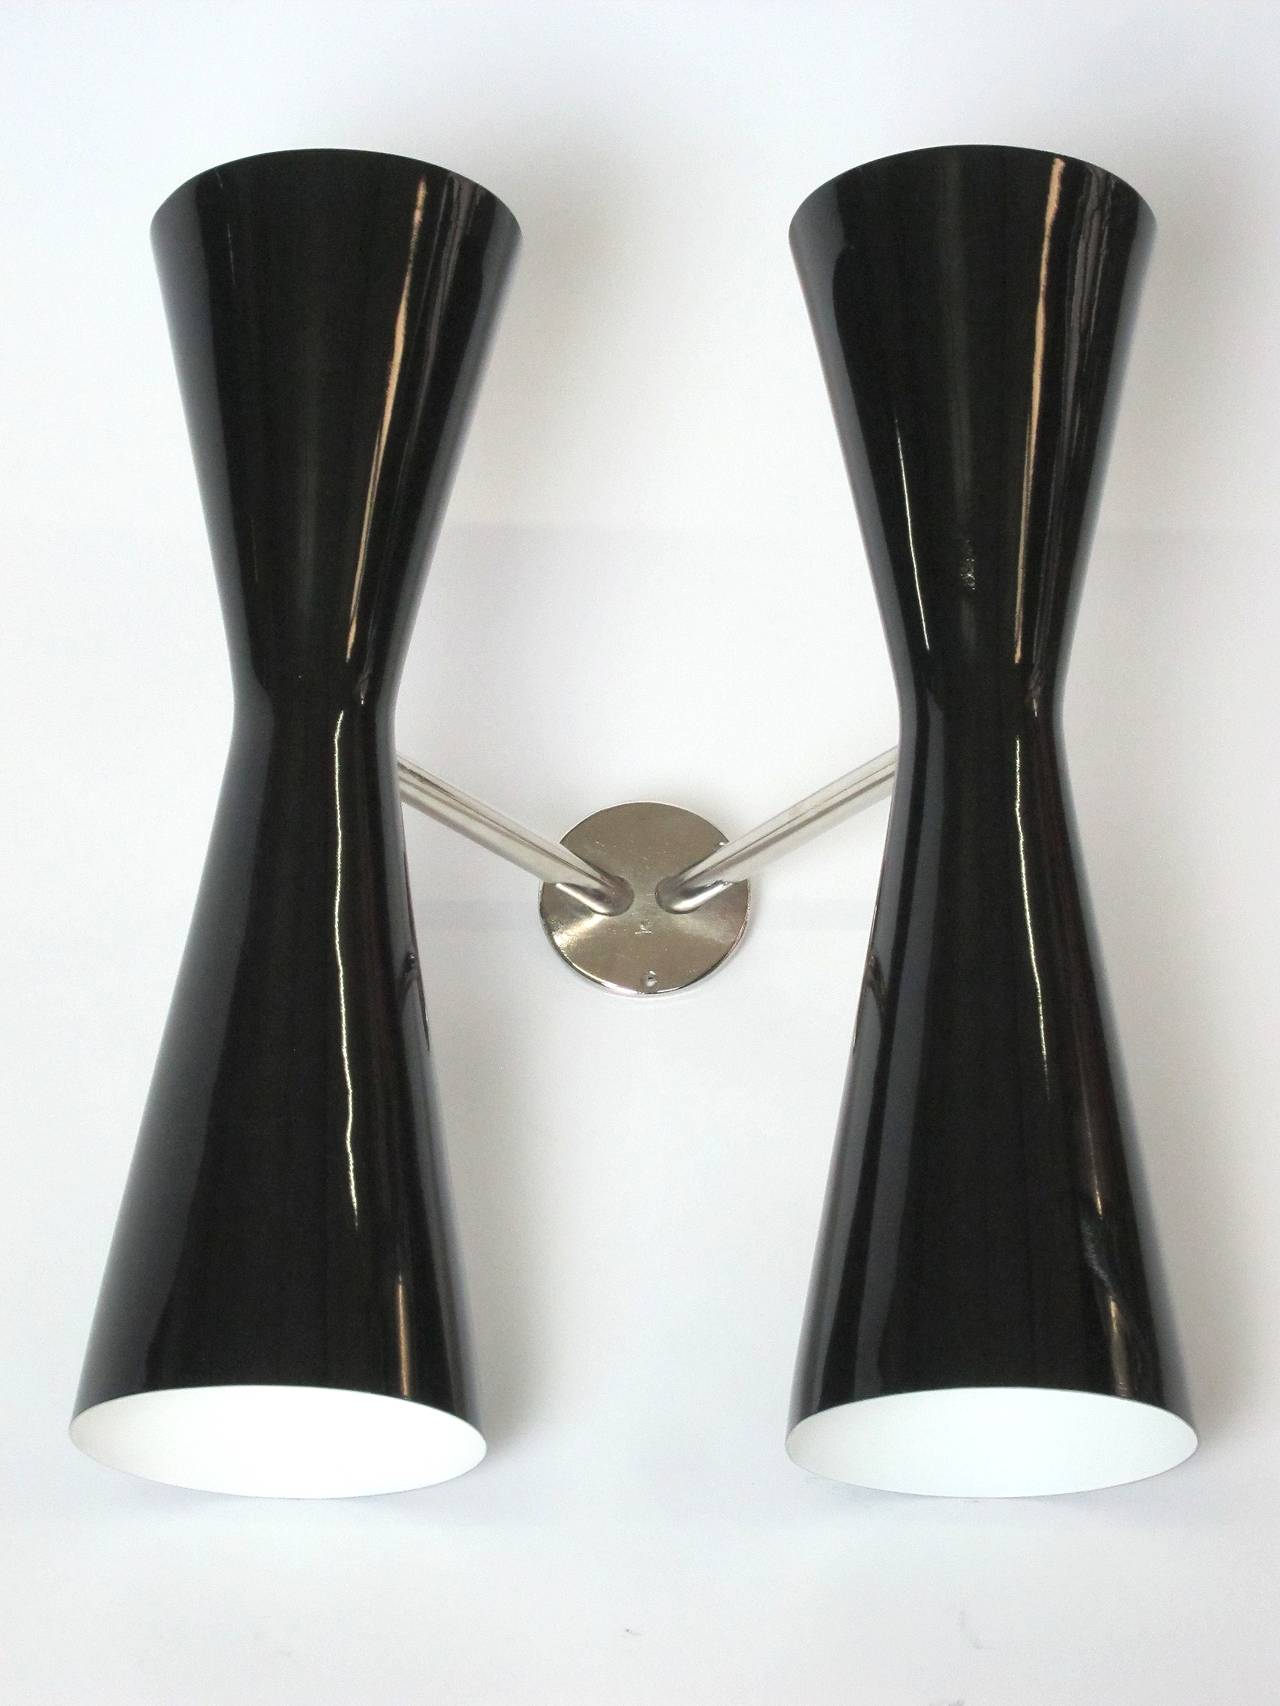 This beautiful 18 inch 4-light twin sconce, attributed to BAG Turgi Switzerland and manufactured in the 1950's, was completely restored. The shiny black lacquered aluminium shades are kept by a nickel-plated wall fixing.